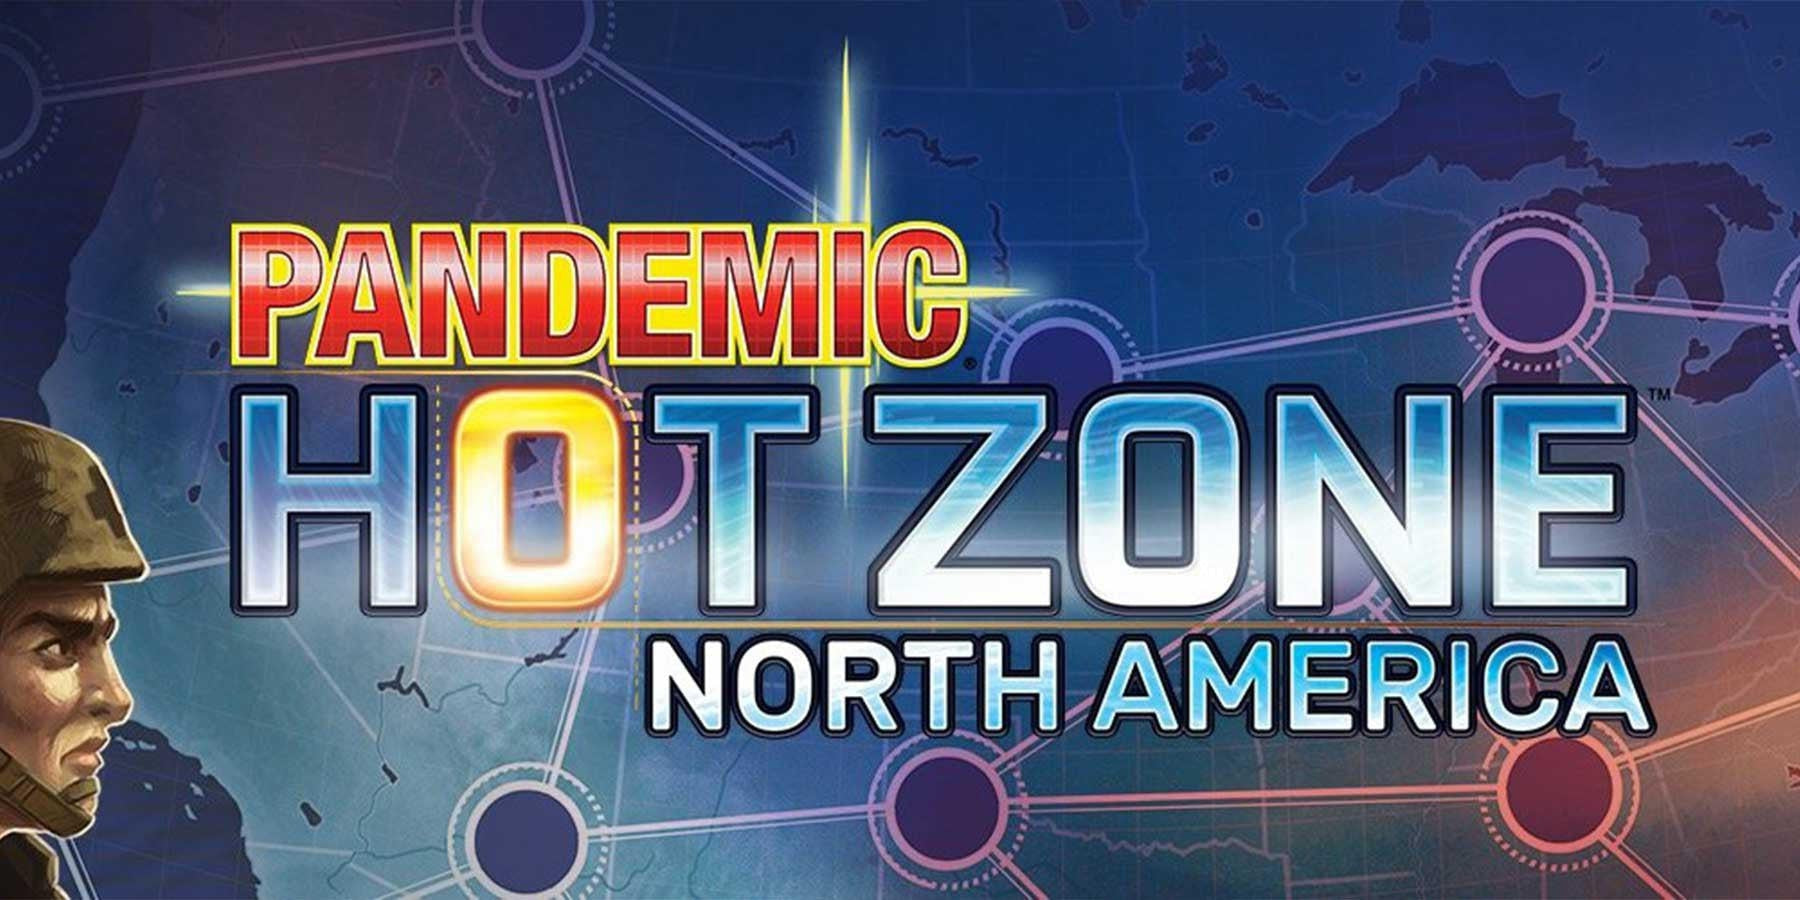 Pandemic Hot Zone North America FREE Print & Play Download at Legacy Toys